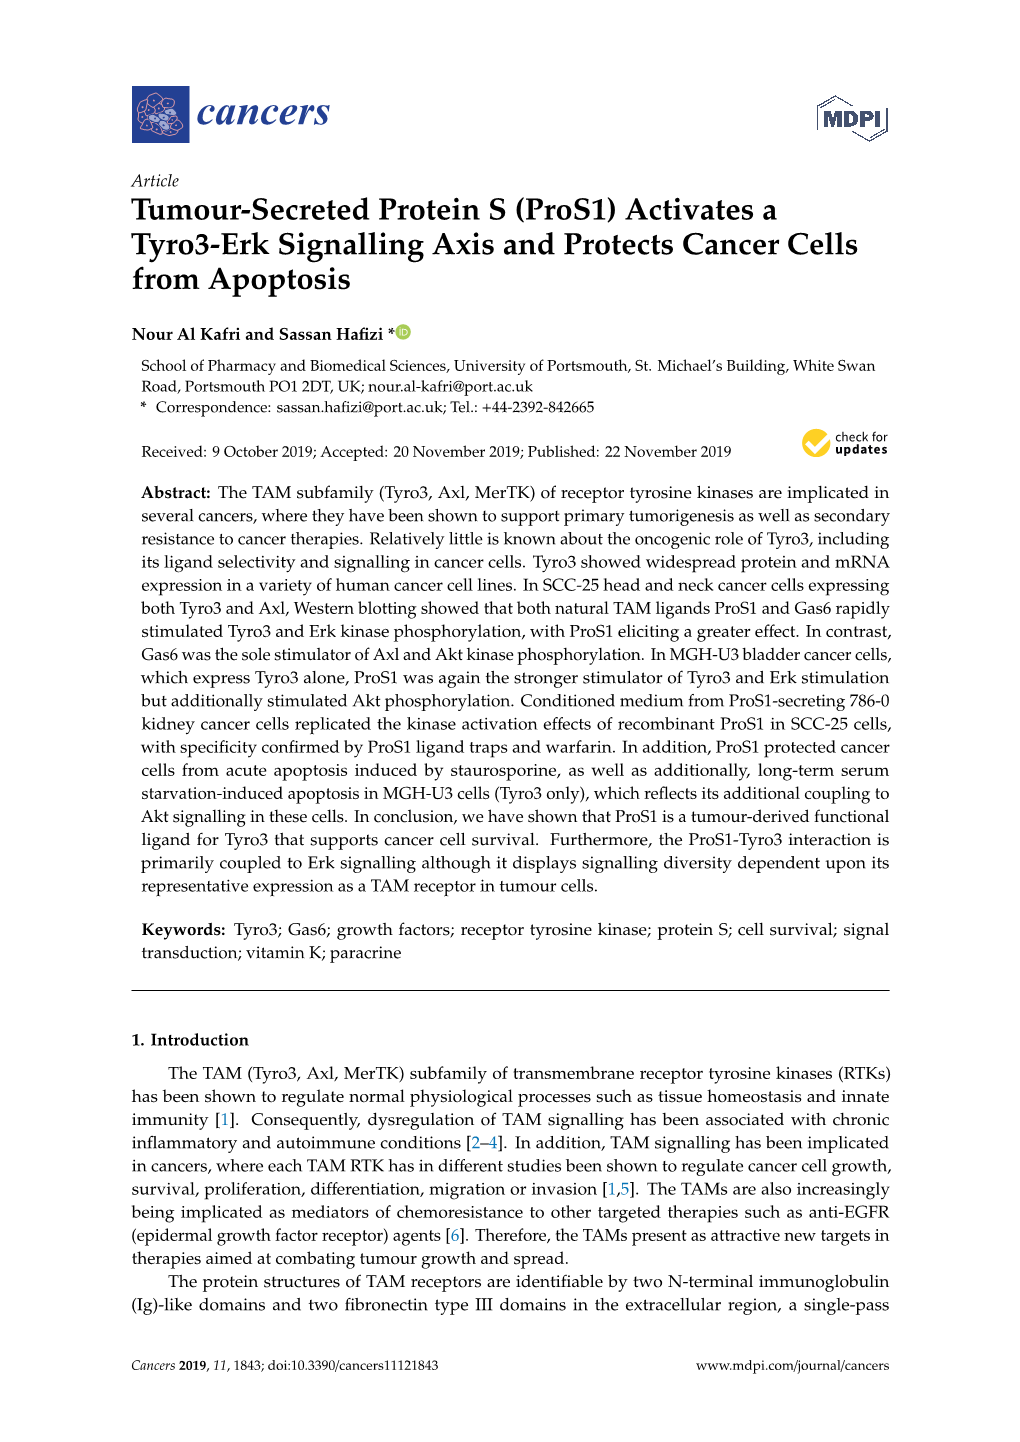 Pros1) Activates a Tyro3-Erk Signalling Axis and Protects Cancer Cells from Apoptosis